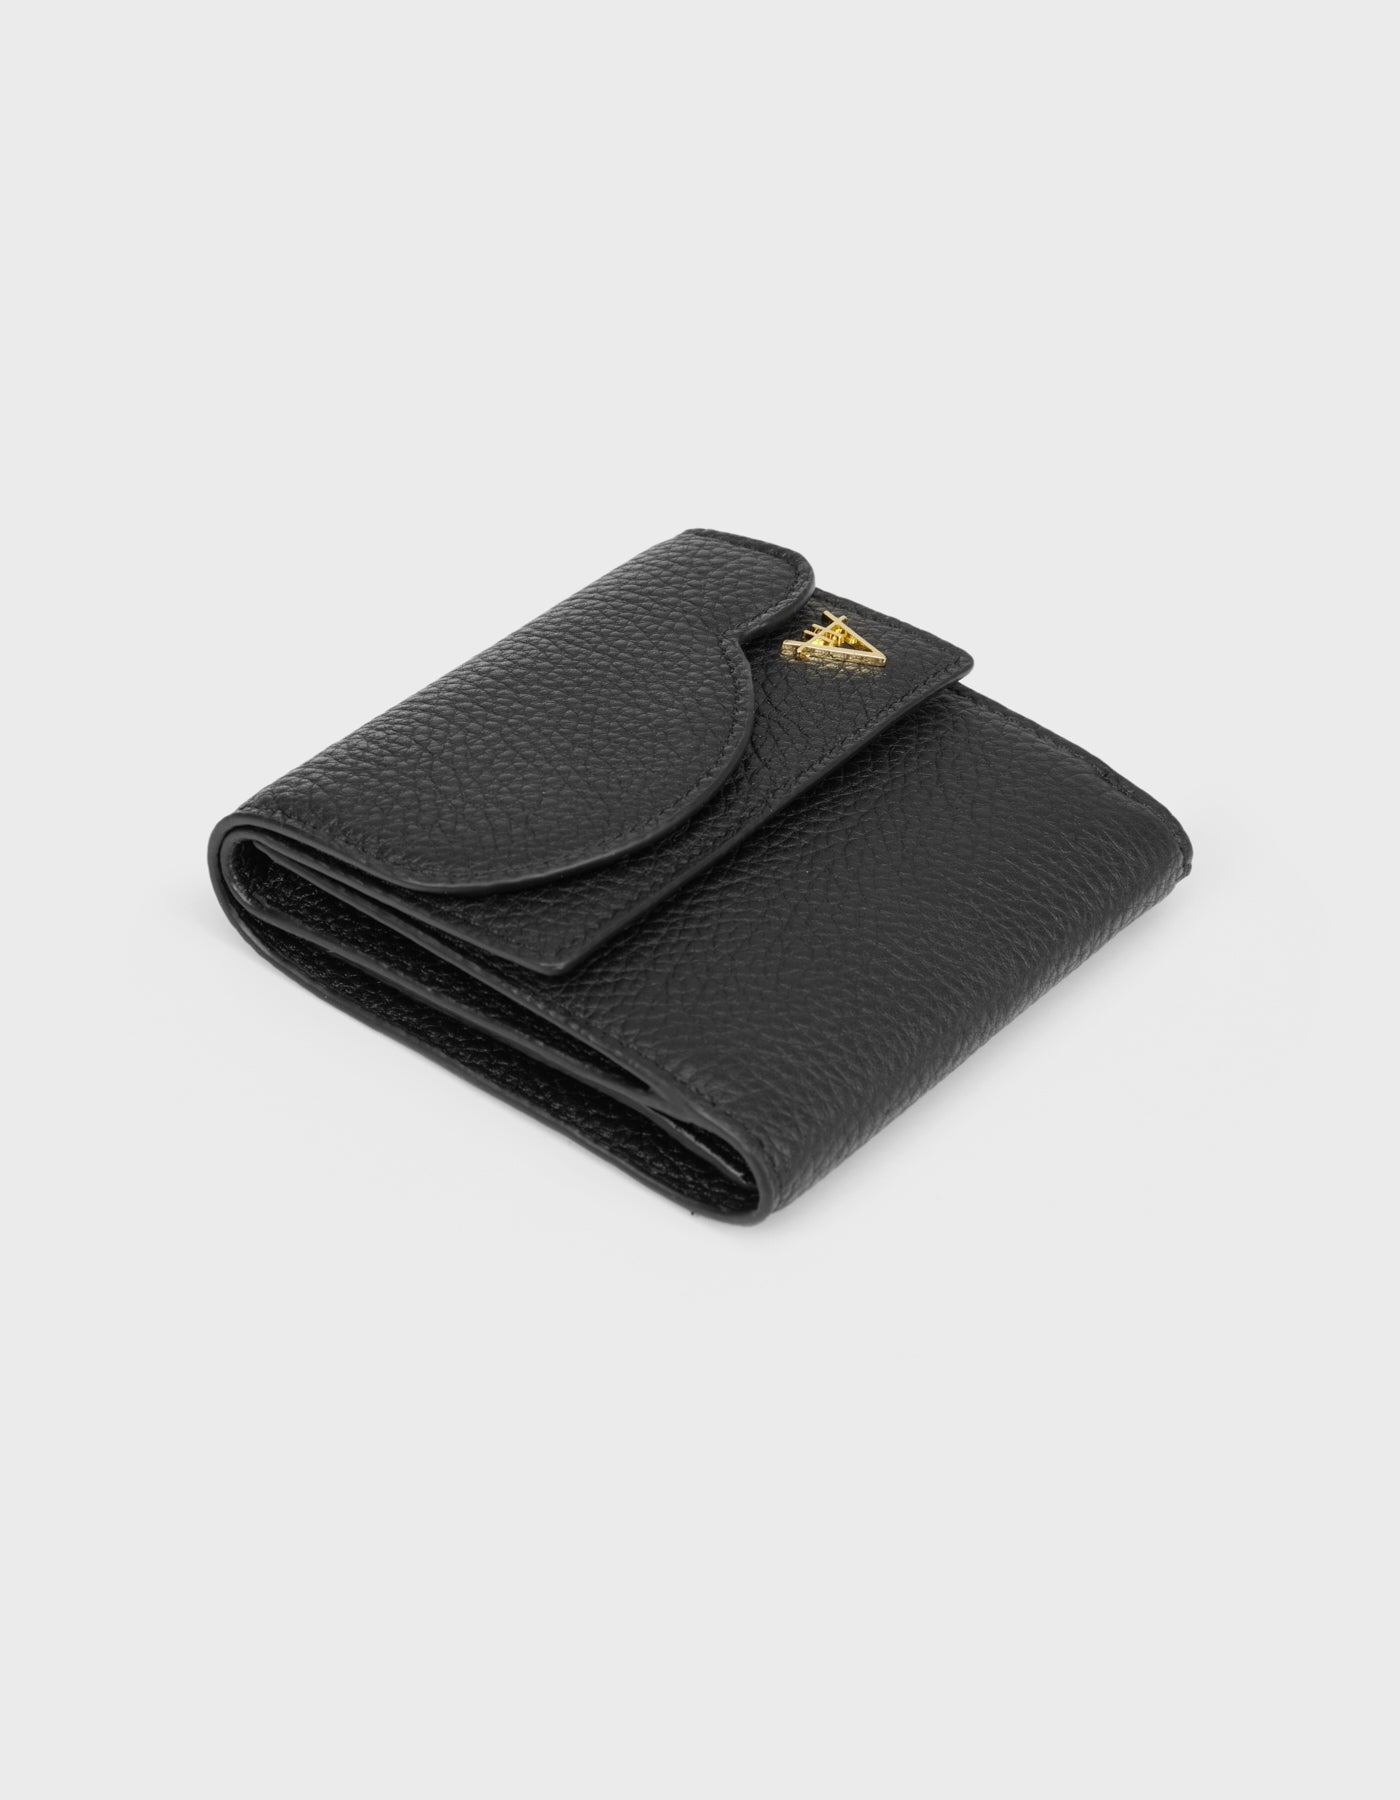 Larus Compact Wallet - Finest Quality HiVa Atelier GmbH Leather Accessories